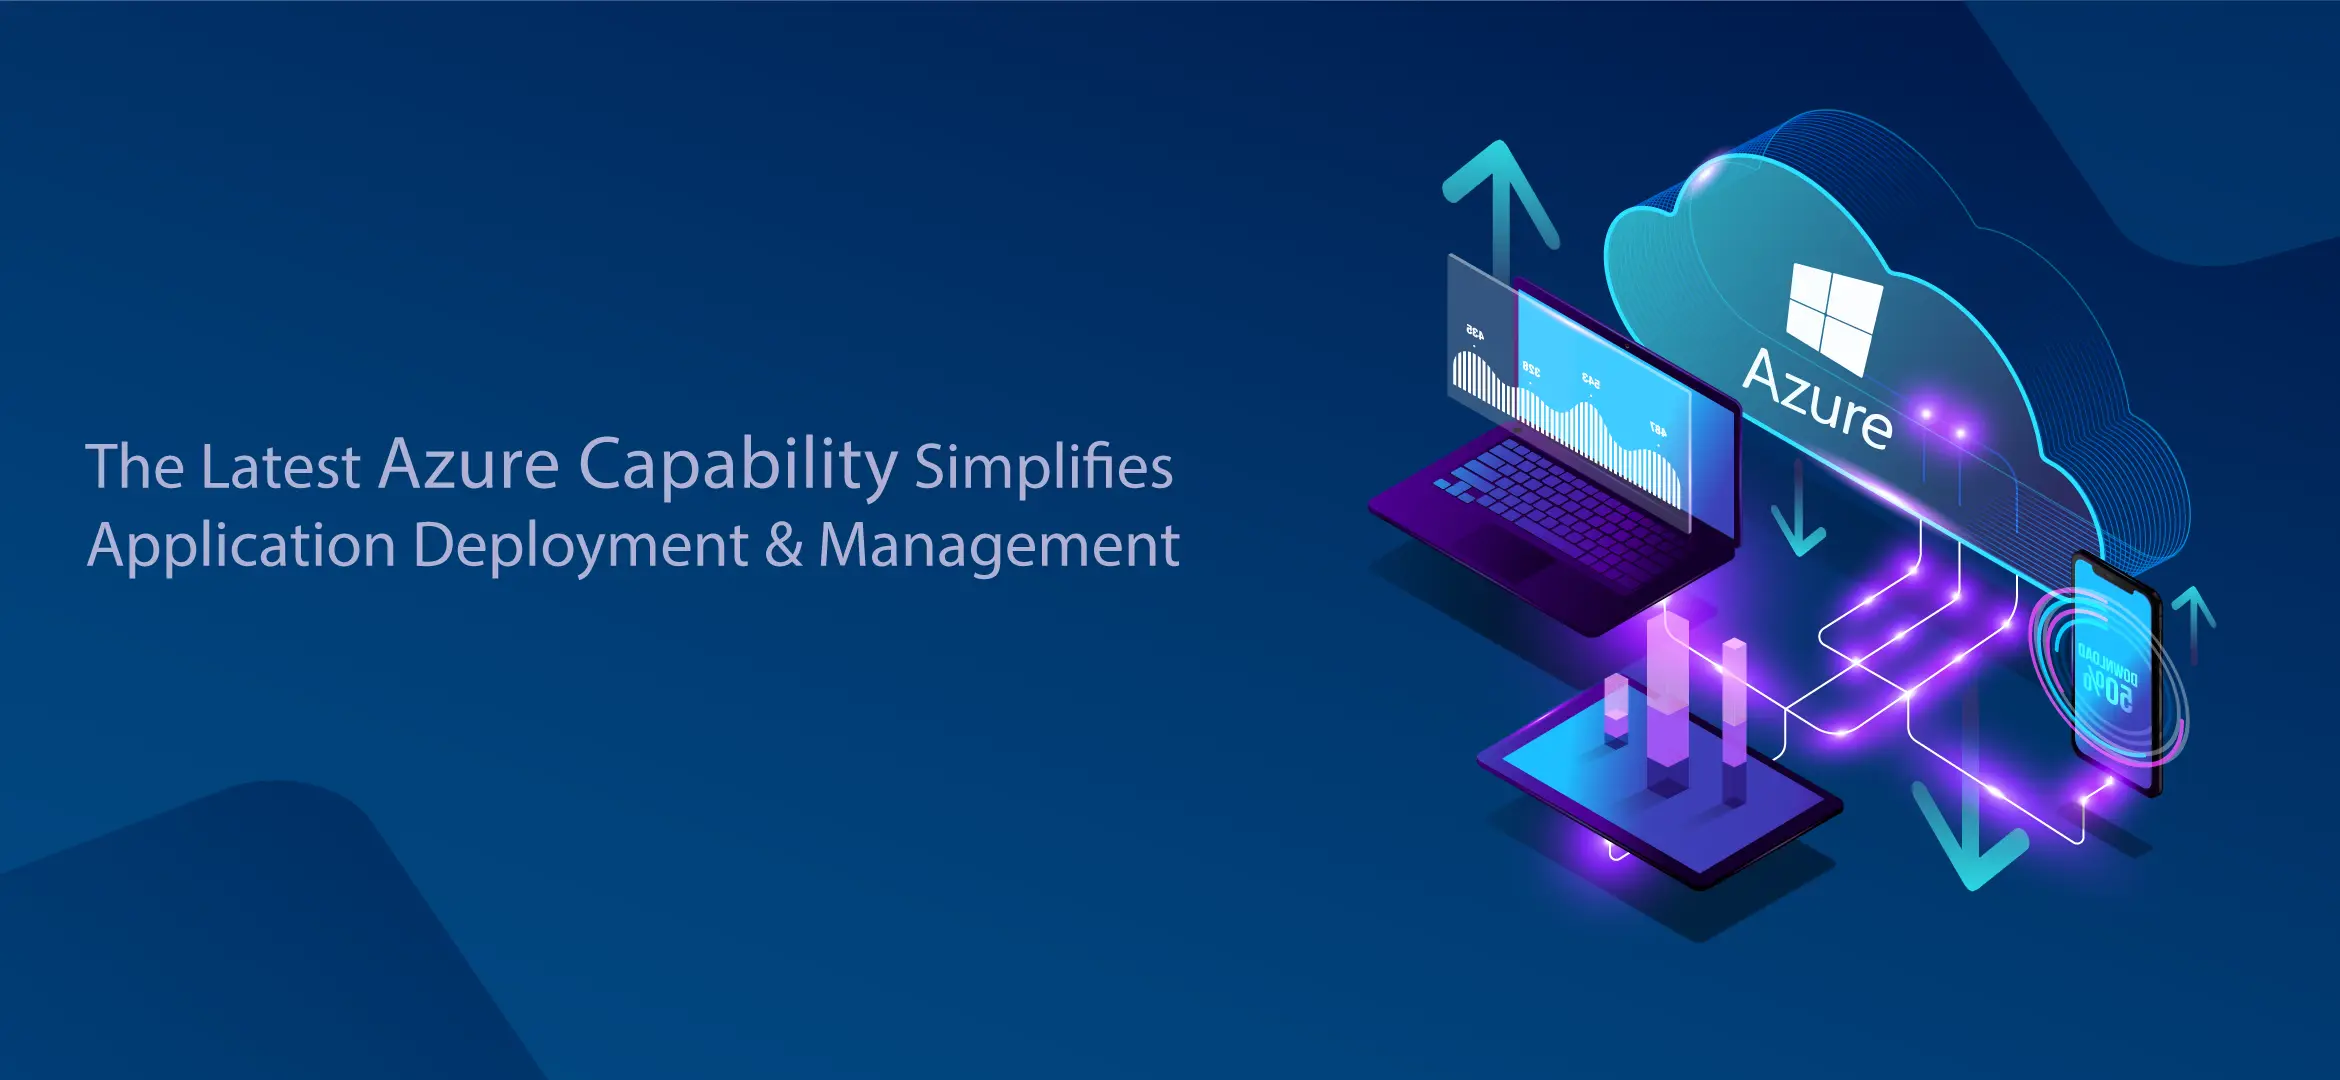 The Latest Azure Capability Simplifies Application Deployment & Management